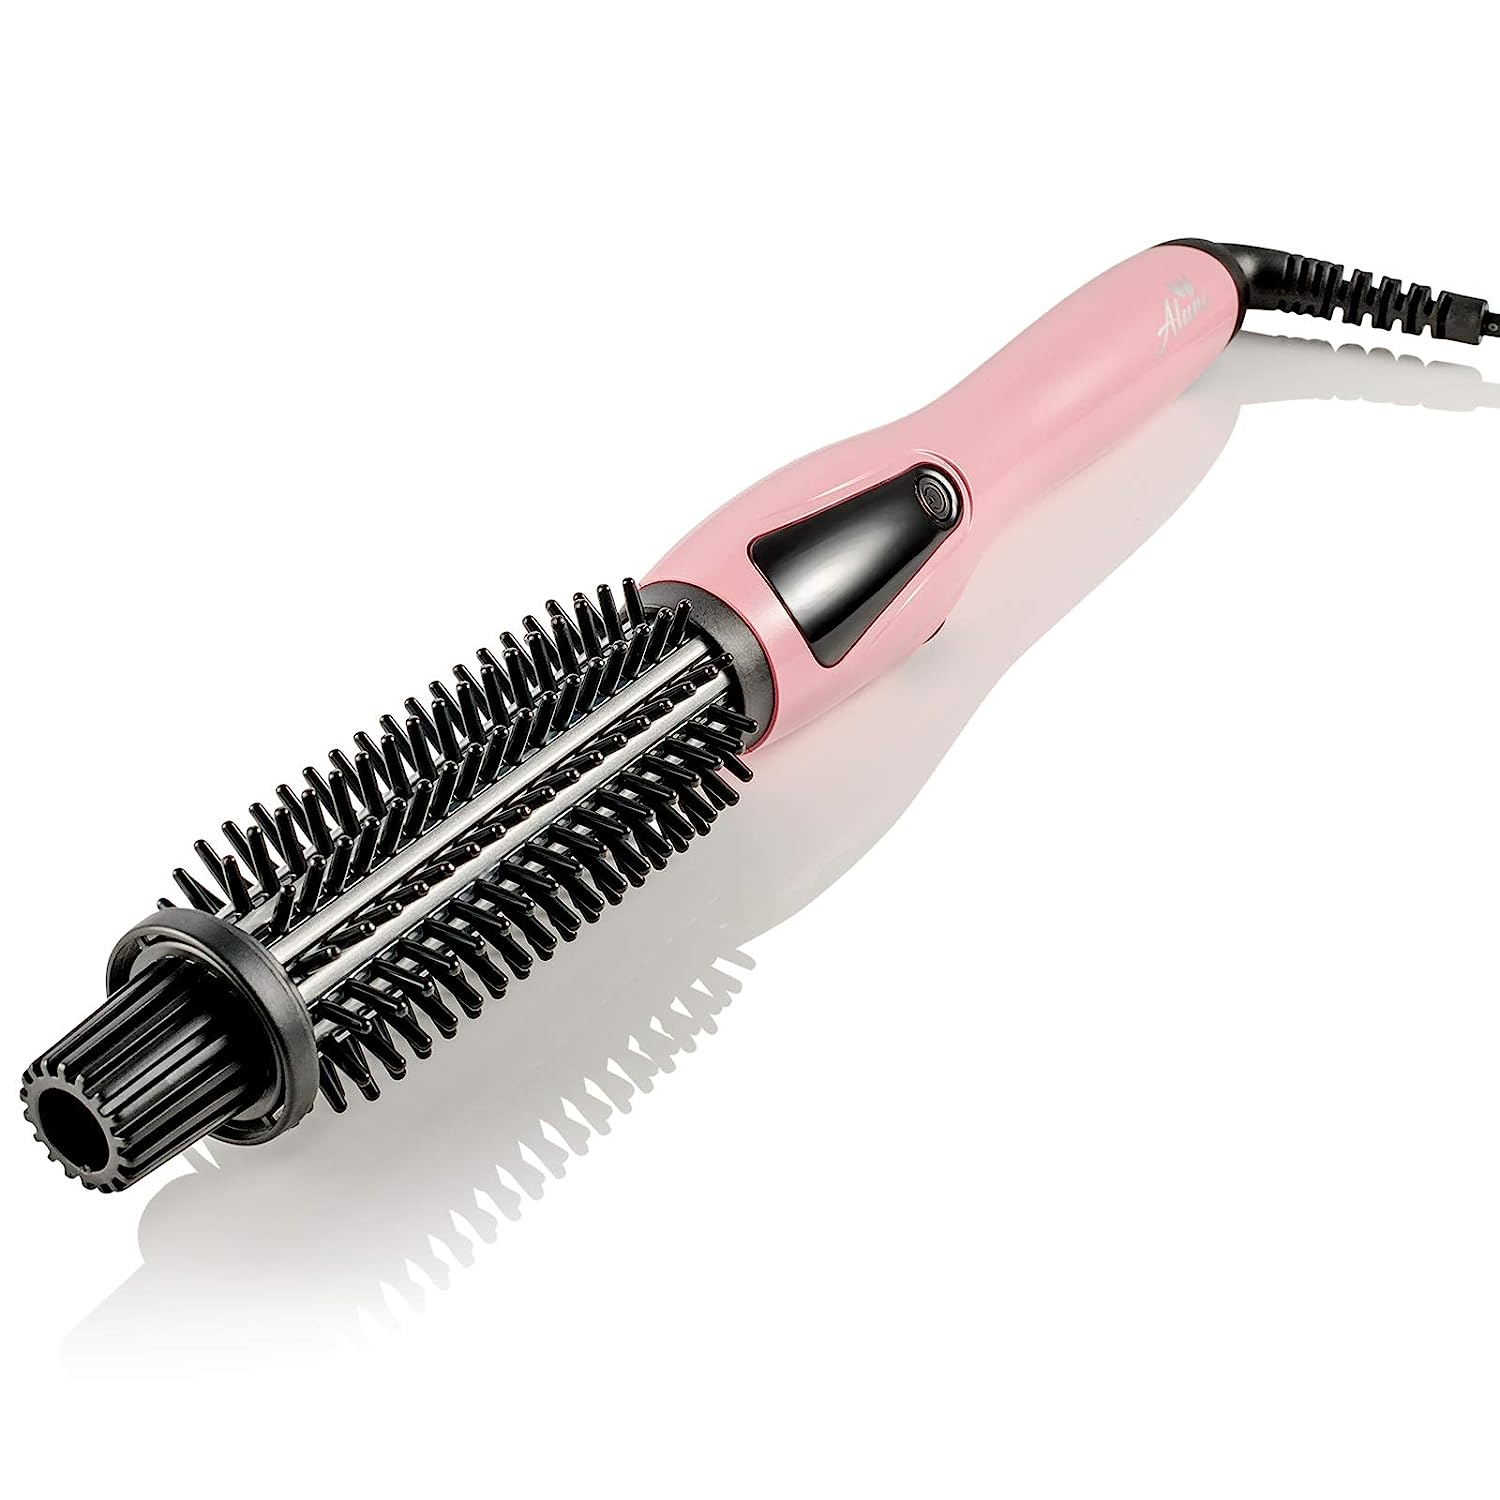 Heated Styling/Curling Iron Brush | 3-in-1 Ceramic 1 [...]